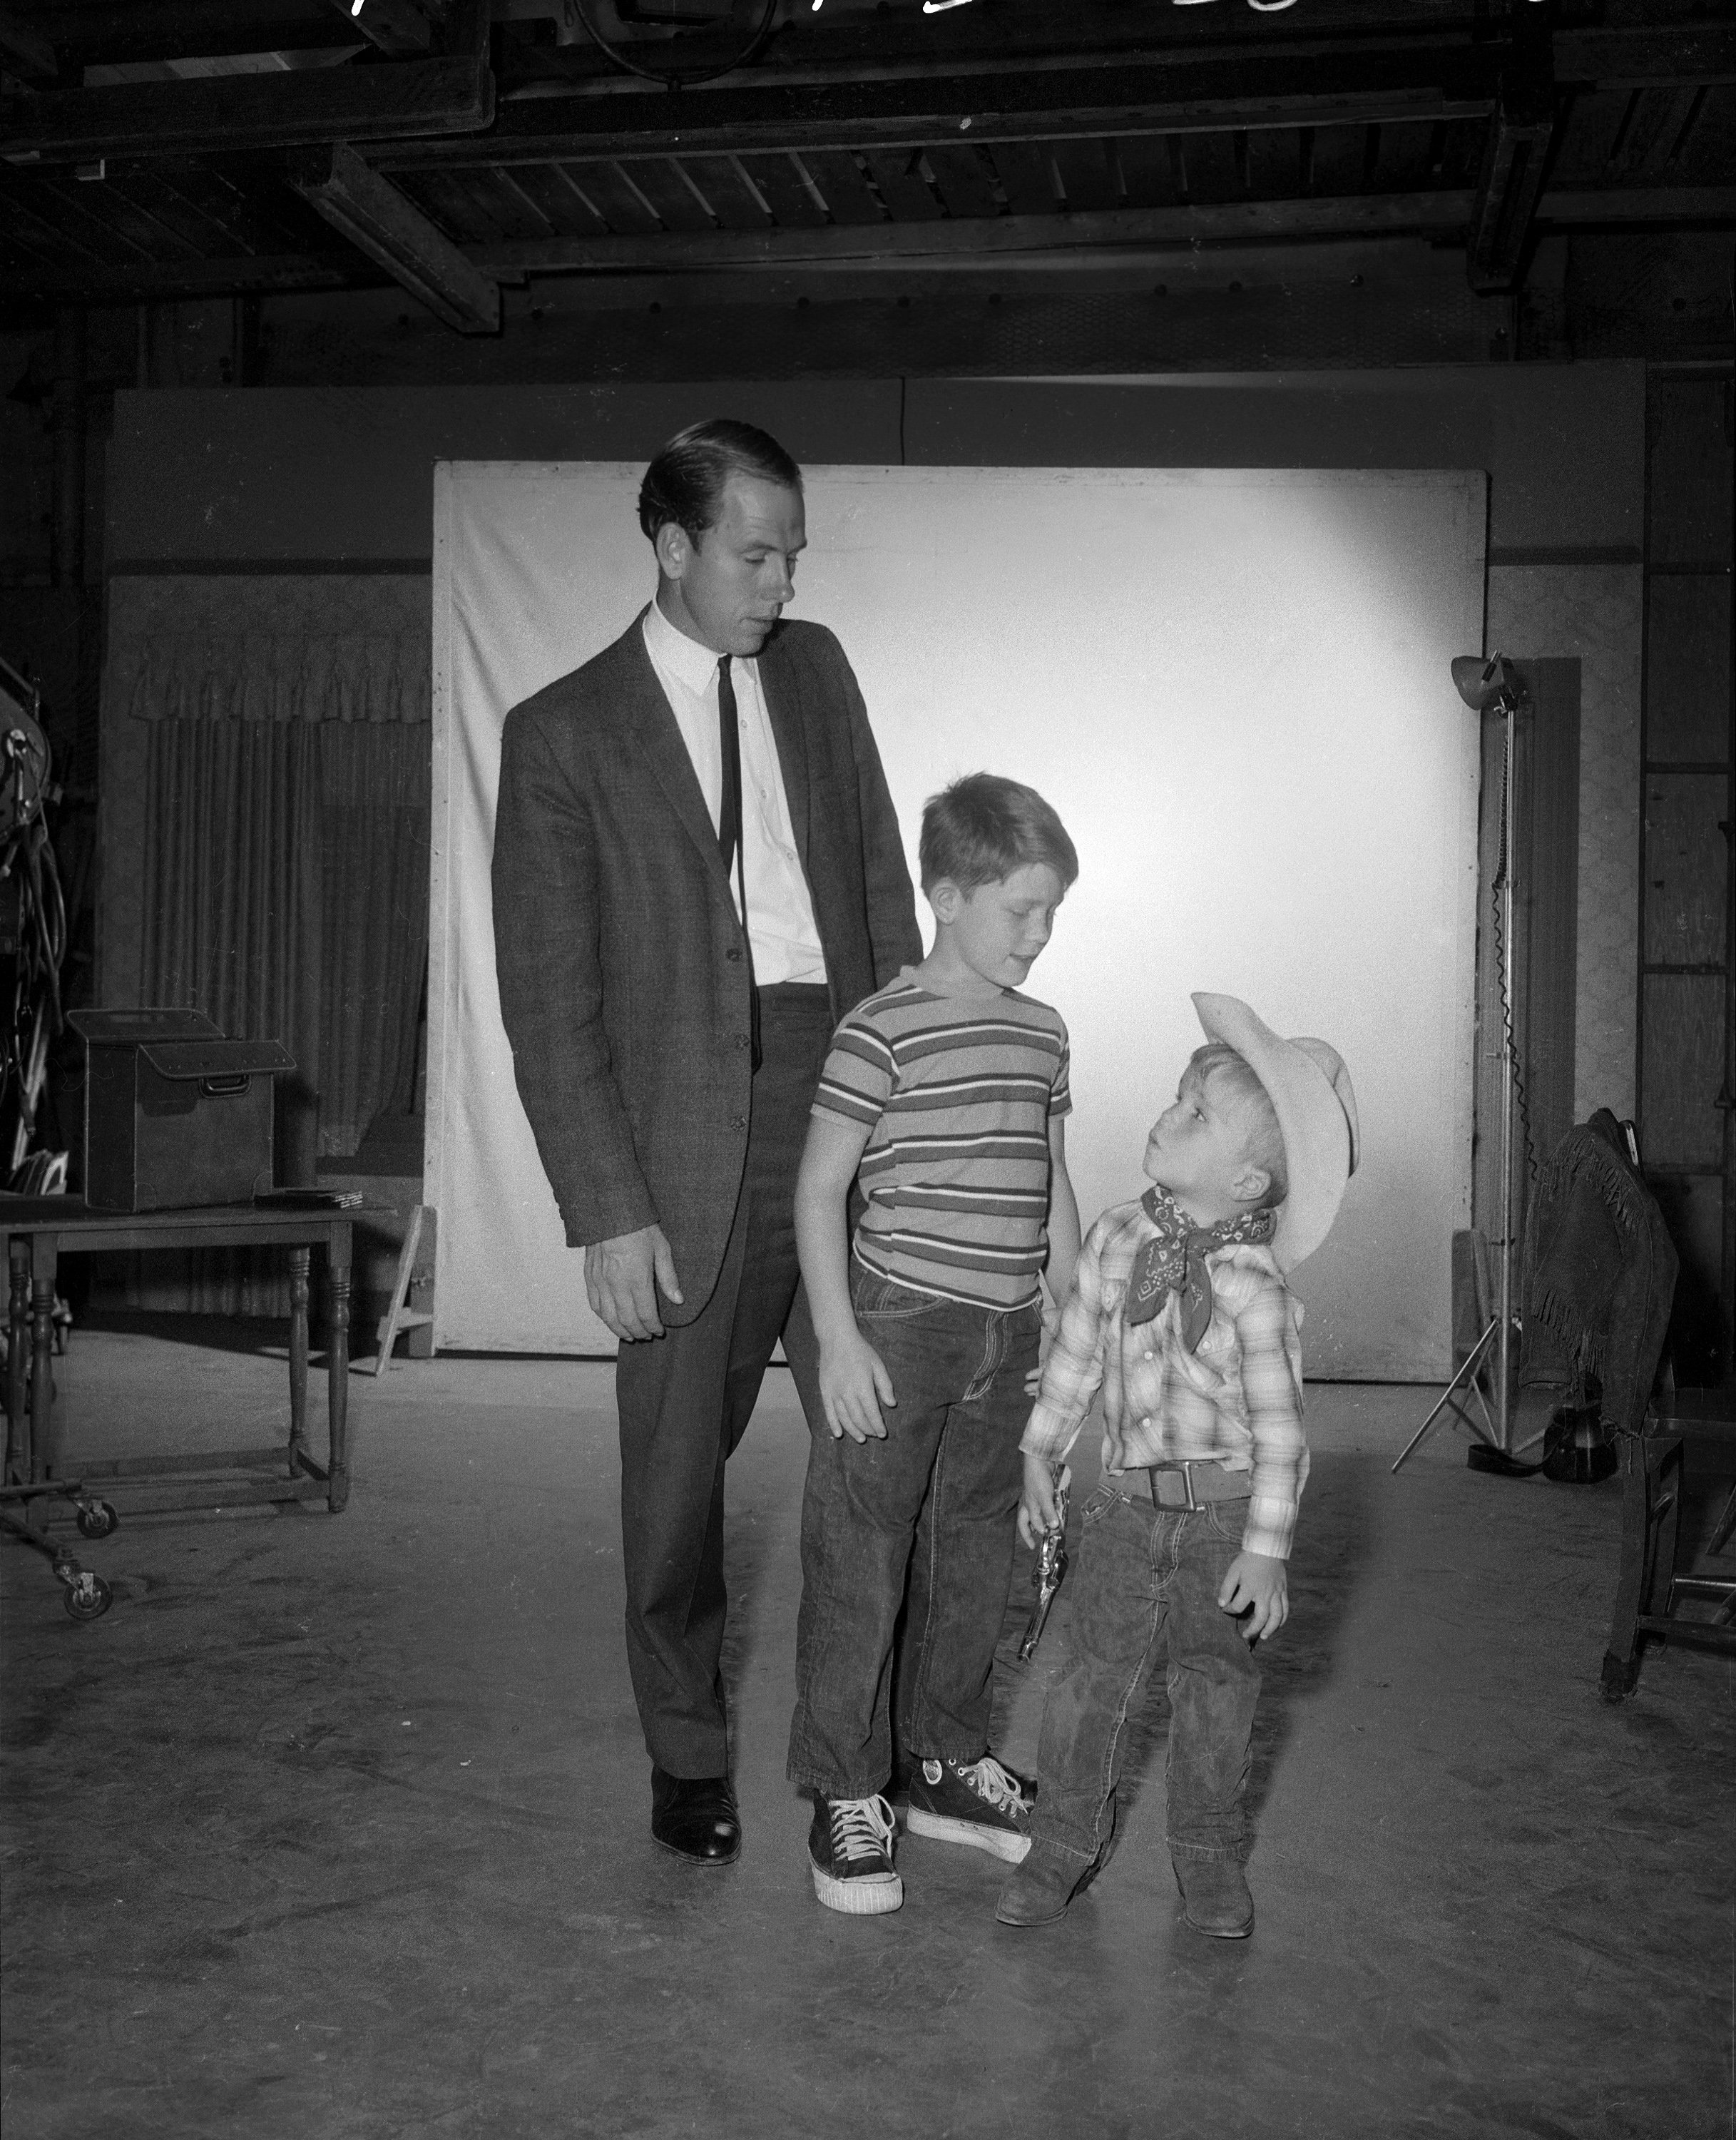 Clint Howard, far right, dressed as Leon from 'The Andy Griffith Show' alongside (left to right) his father Rance Howard and older brother Ron Howard.